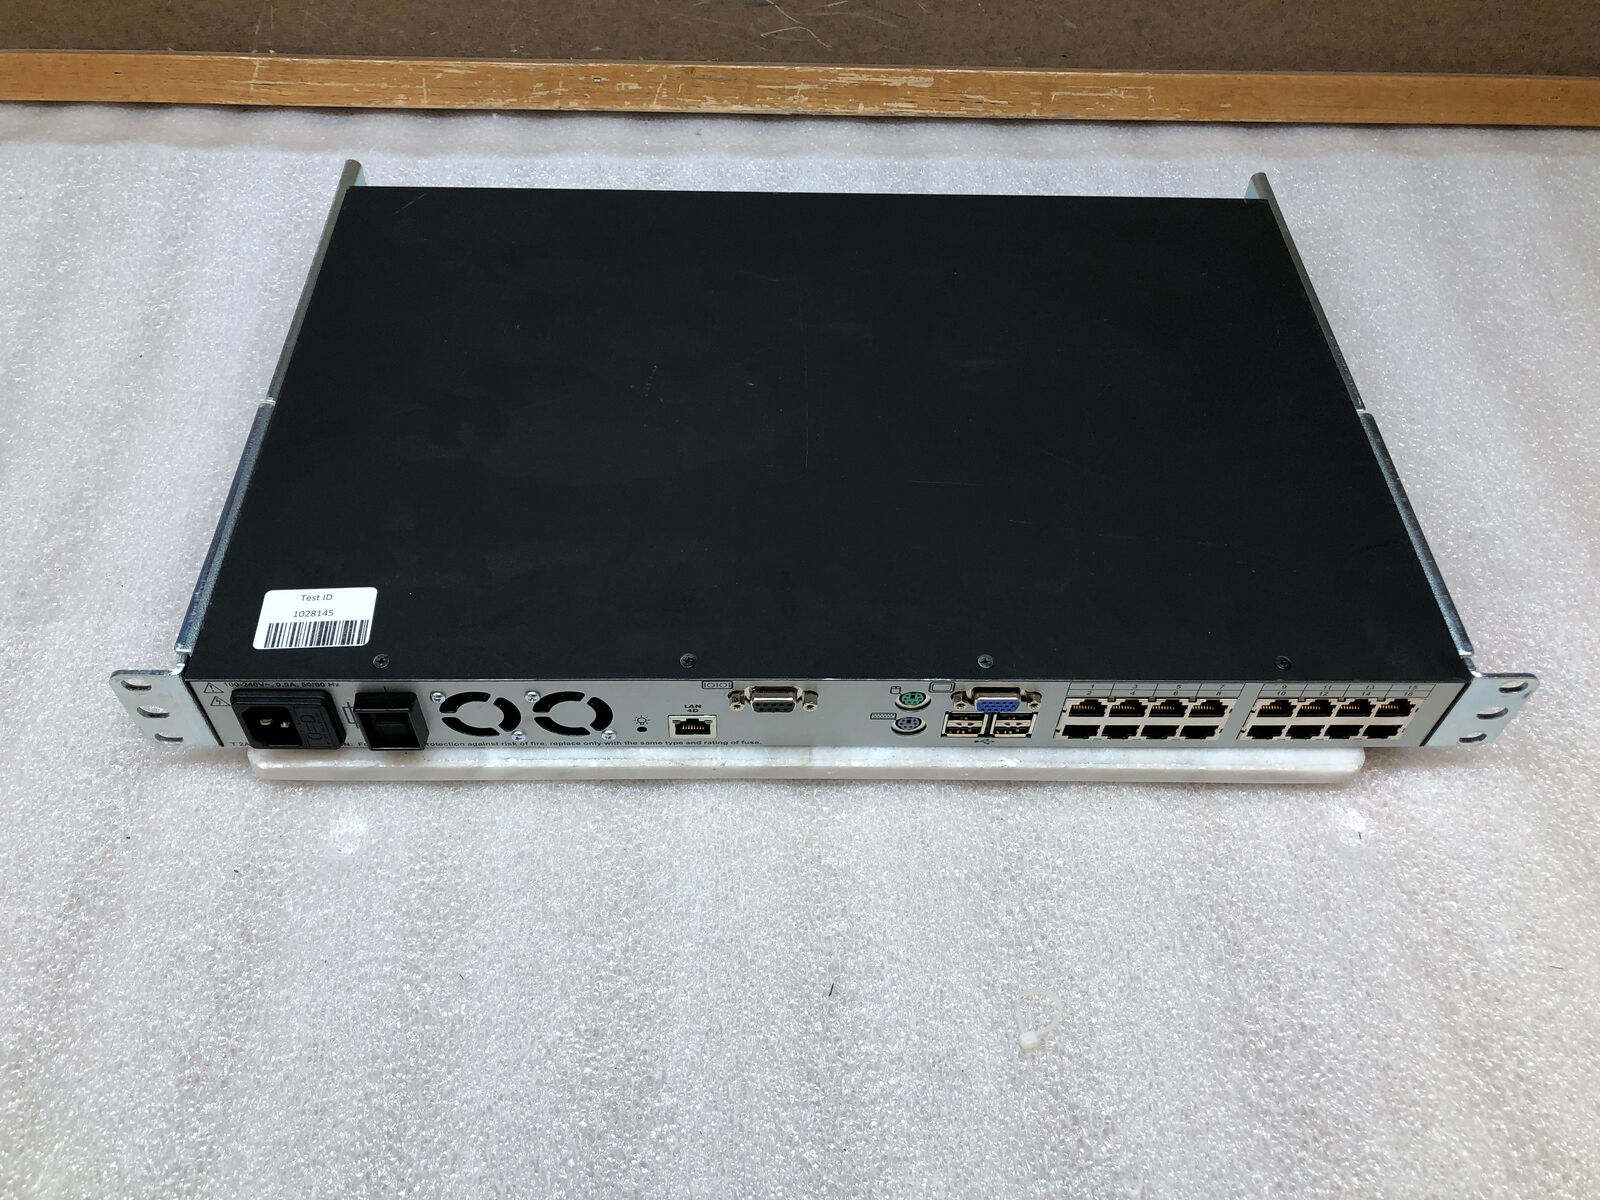 HP Model 408965-002 16-Port SPS Console Switch with USB/VGA RS232